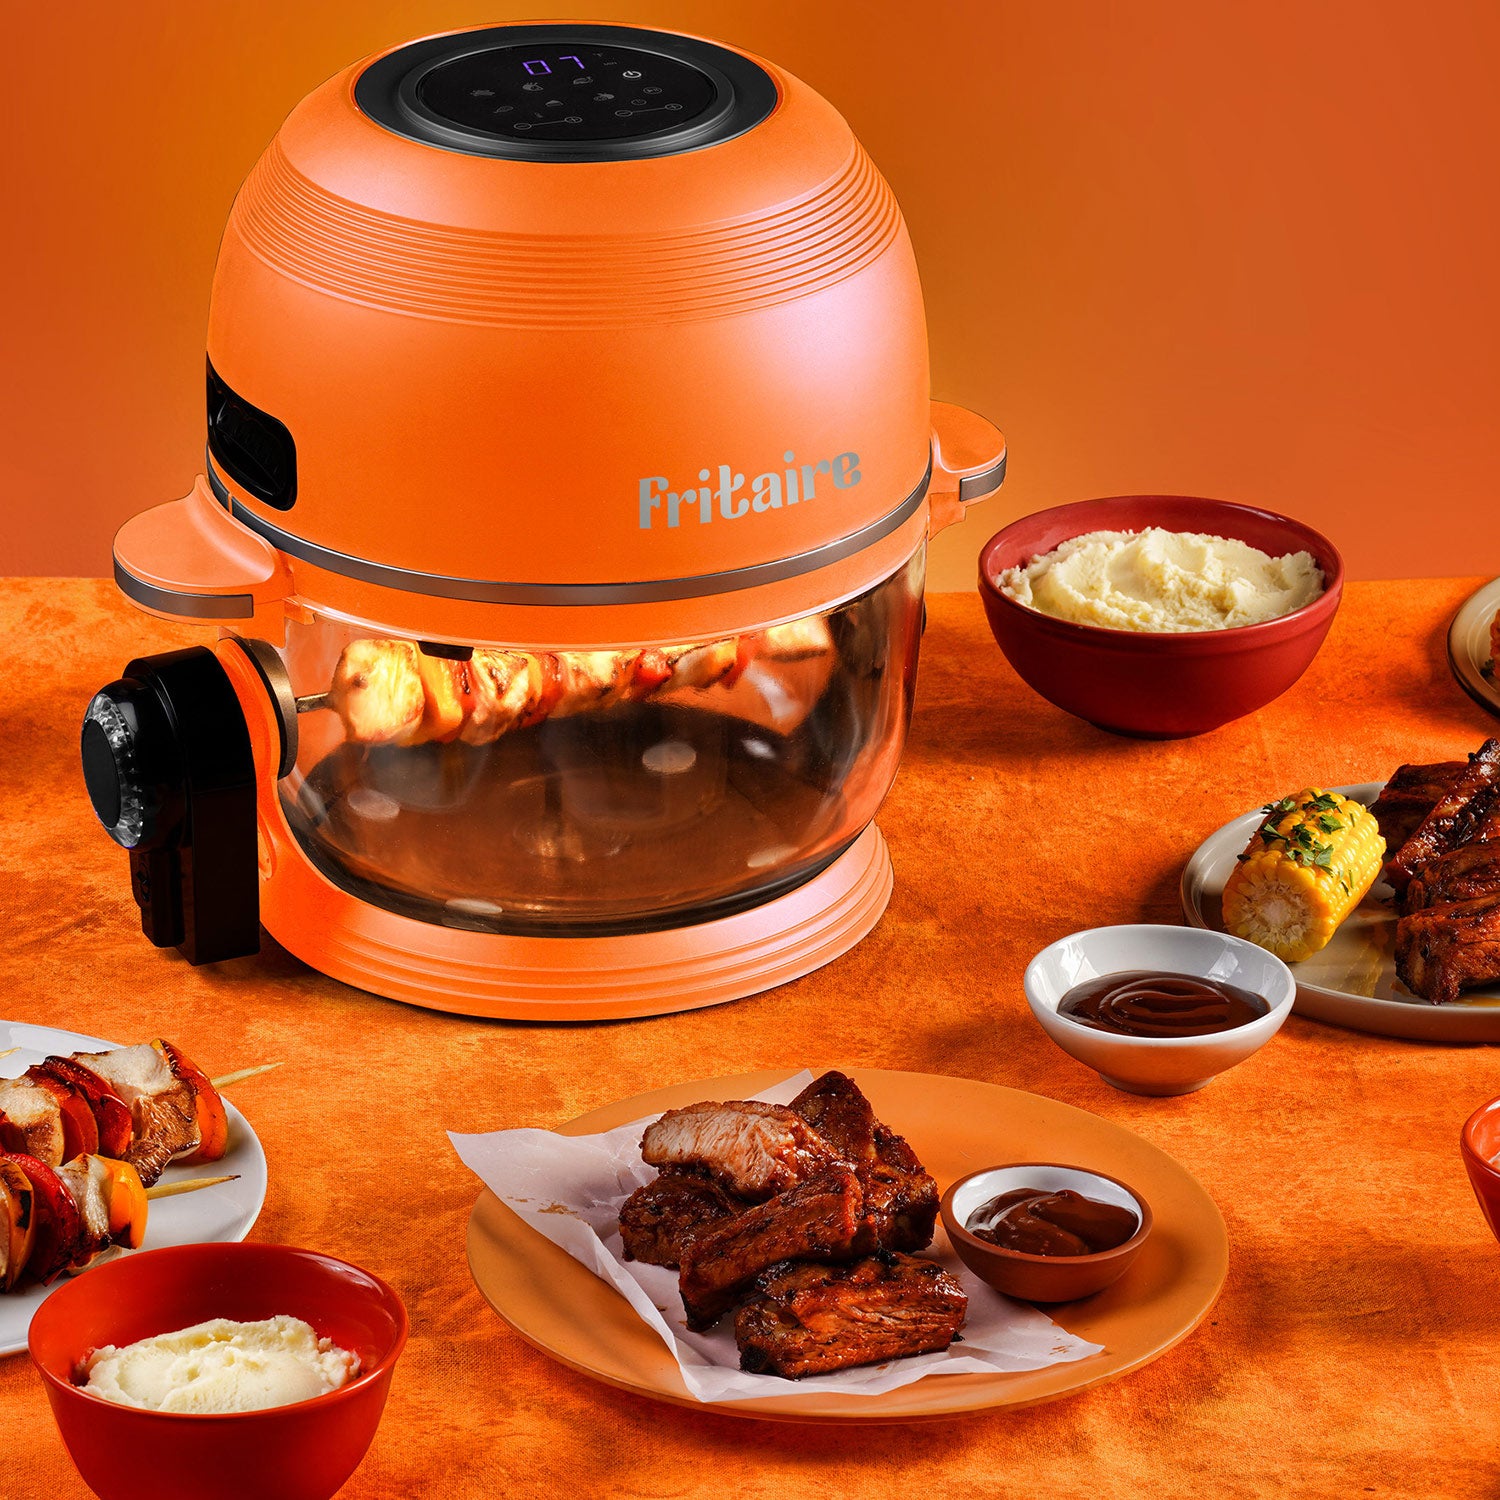 Fritaire Self-Cleaning Transparent Air Fryer